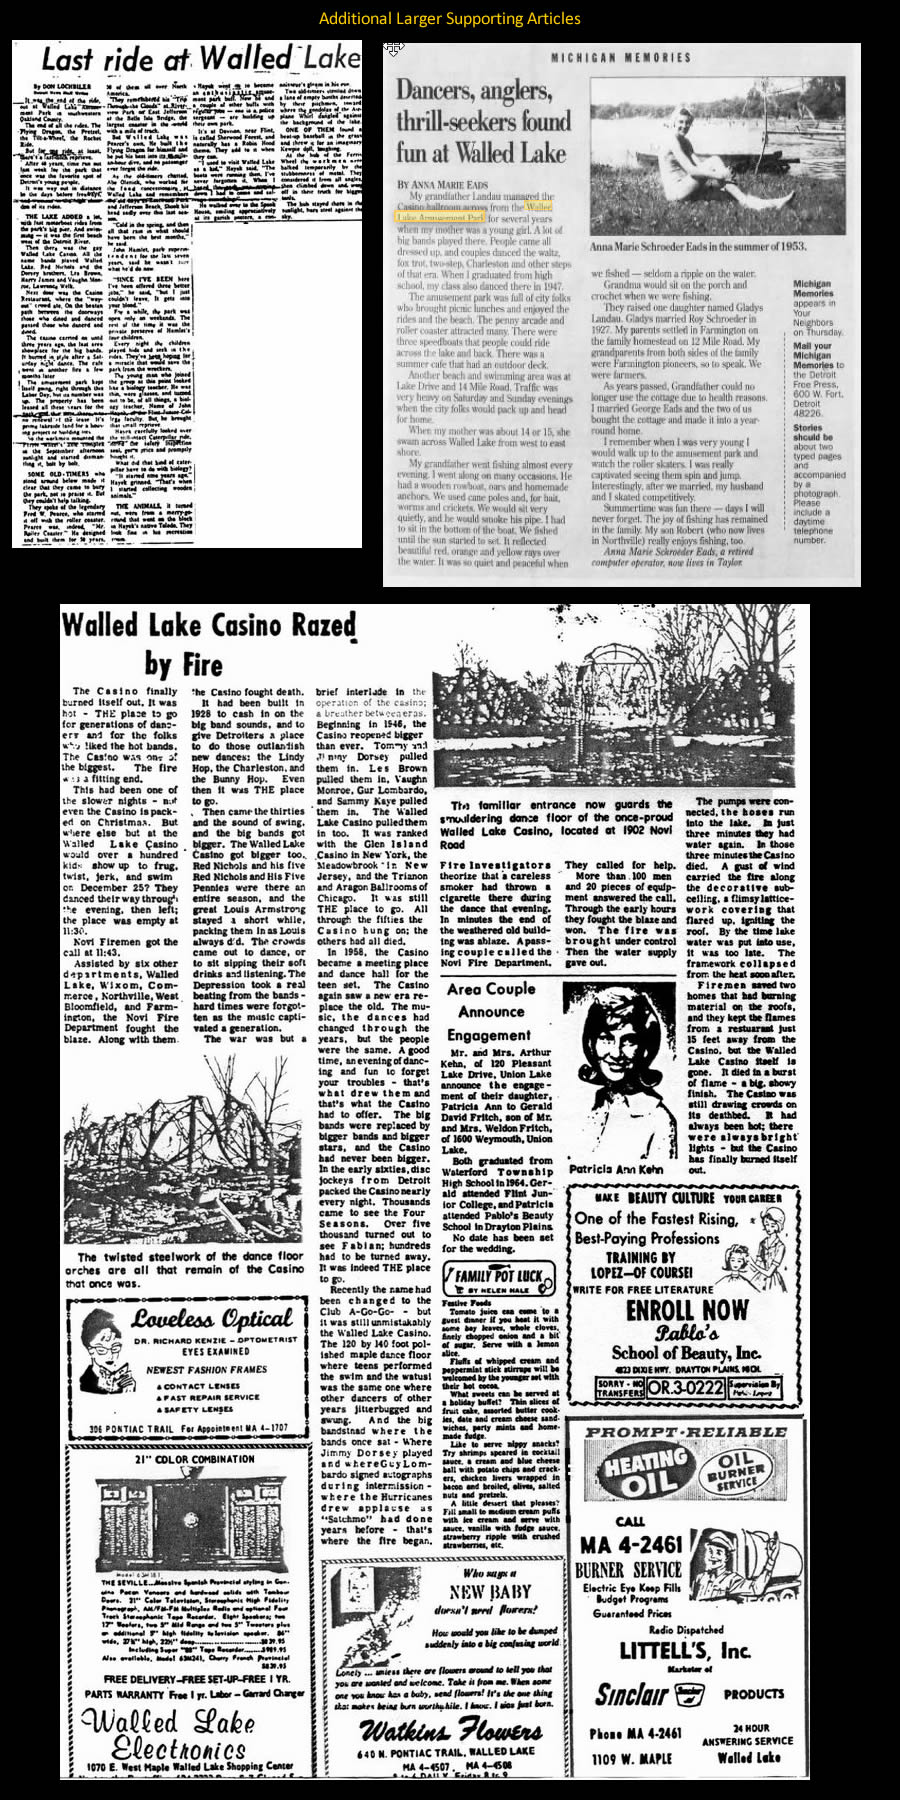 Walled Lake Amusement Park (Walled Lake Park) - Supporting Articles